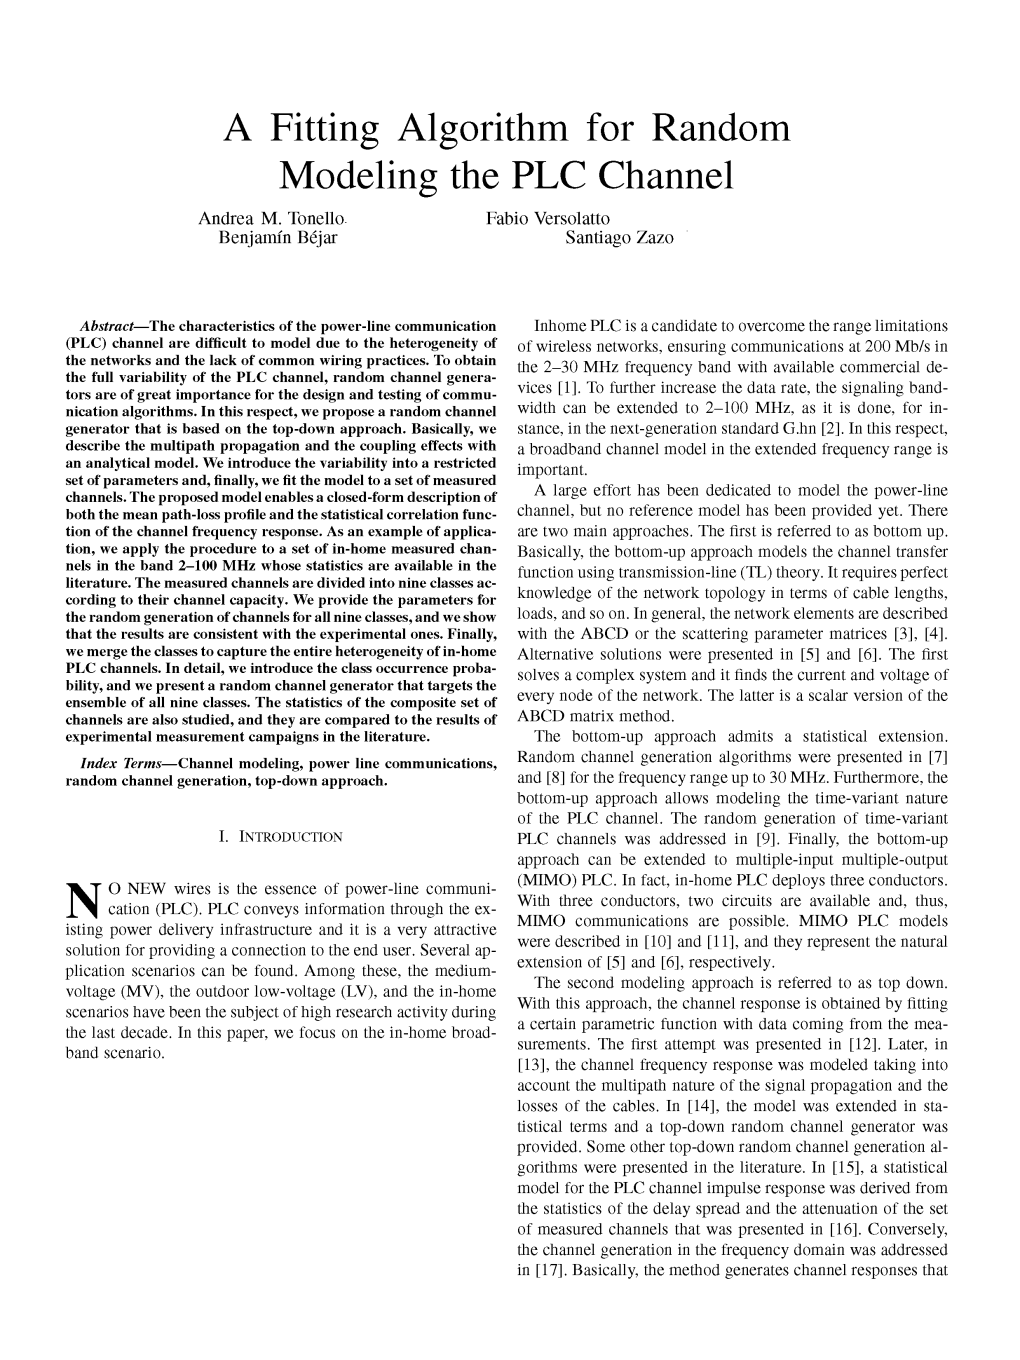 A Fitting Algorithm for Random Modeling the PLC Channel Andrea M